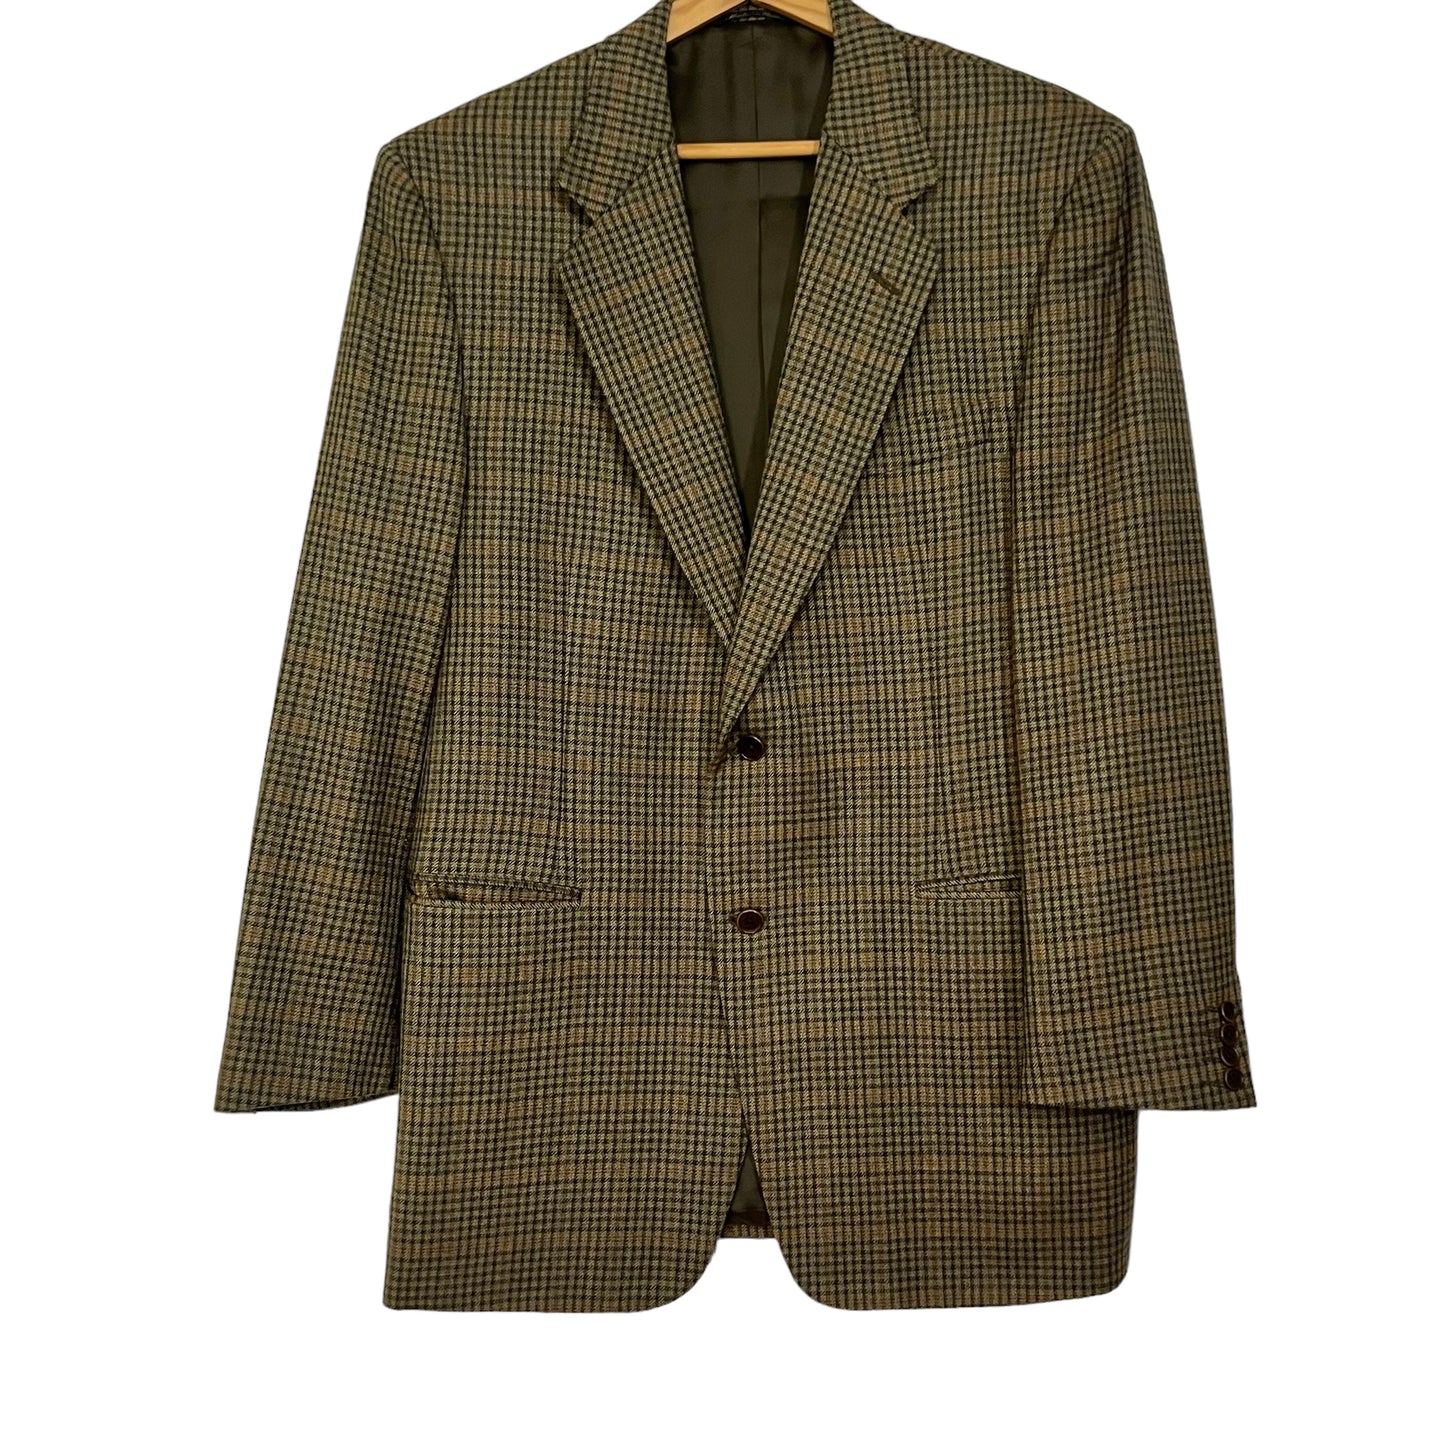 Canali Pure Wool Puppytooth Sport Coat 42R Made in Italy